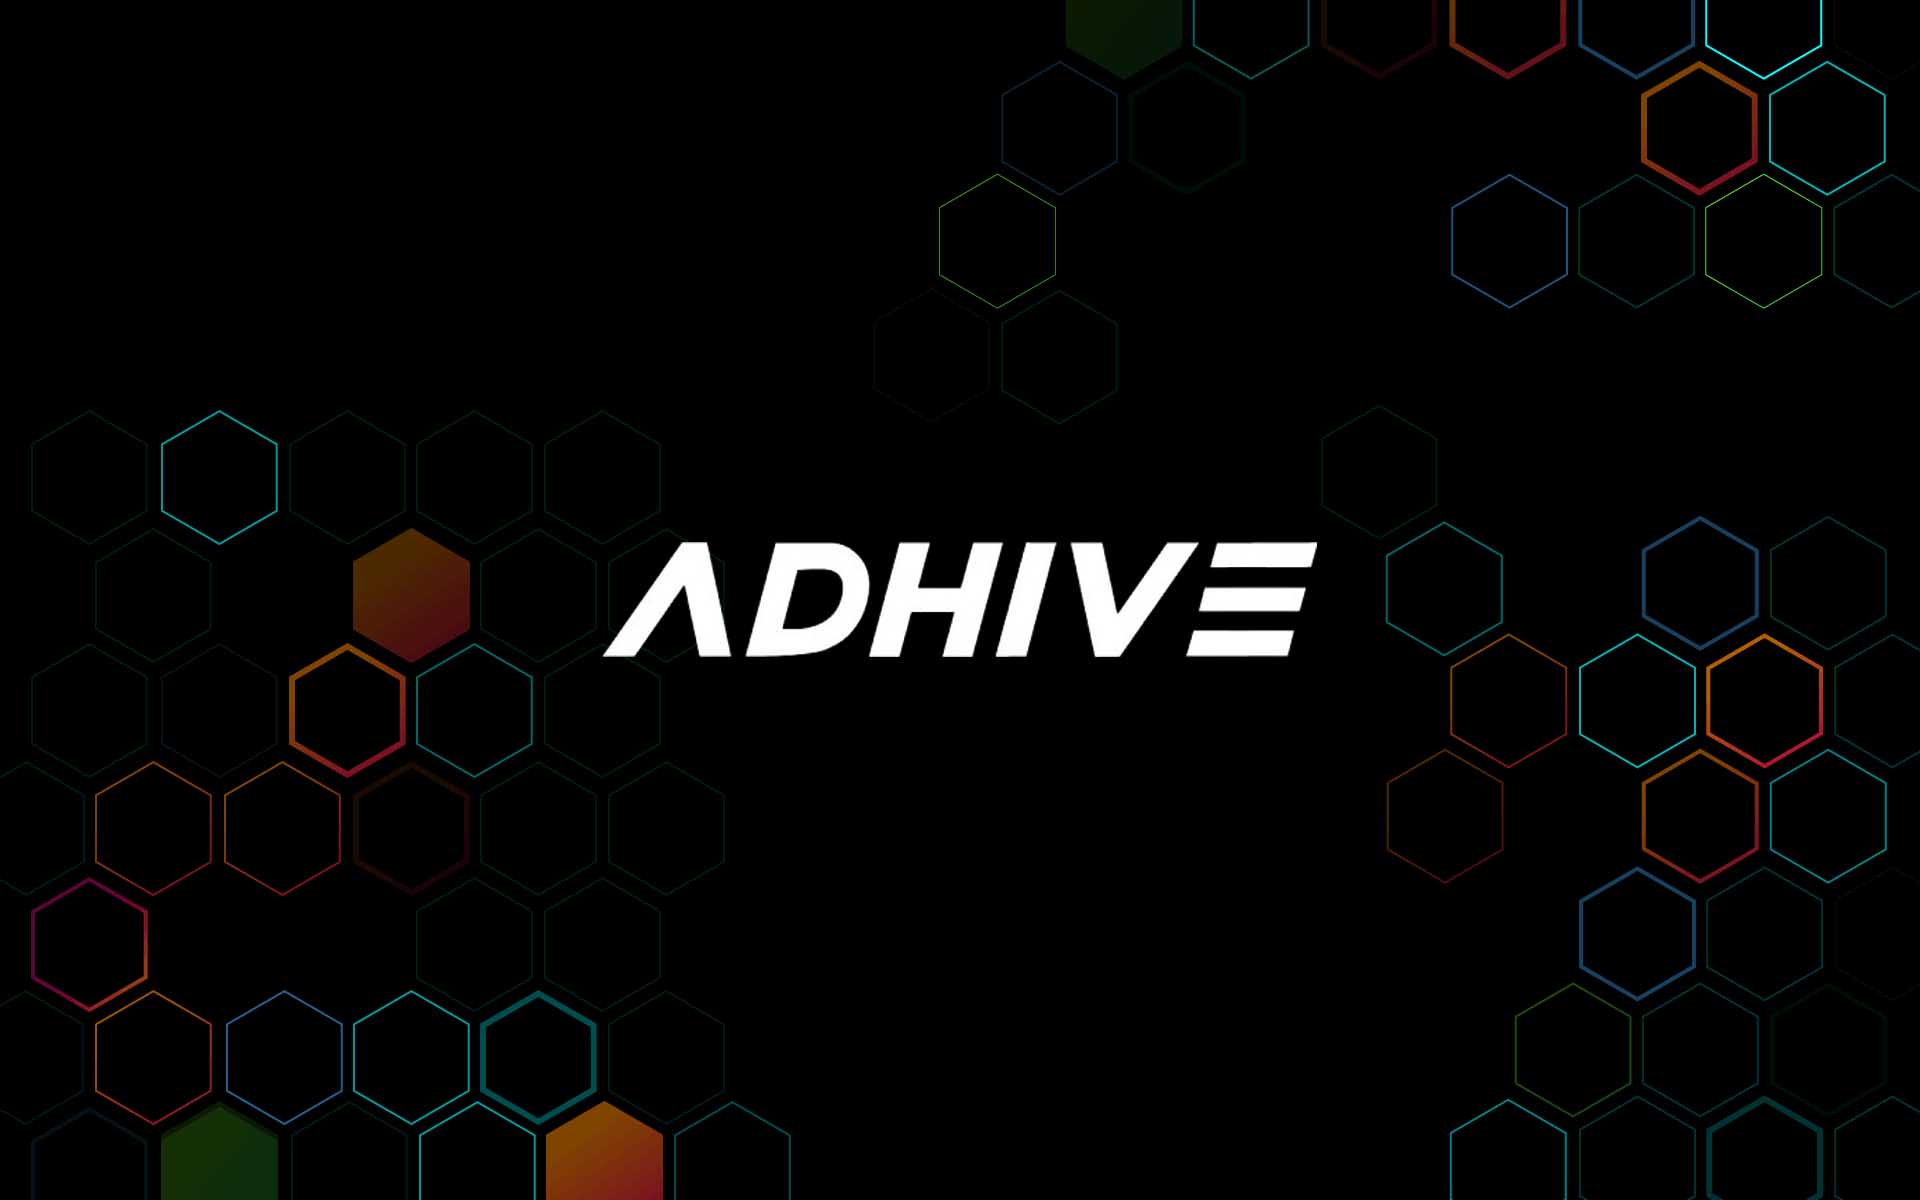 AdHive Platform To Conclude $ 5.5M Presale In 36 Minutes, Gears Up For Token Sale